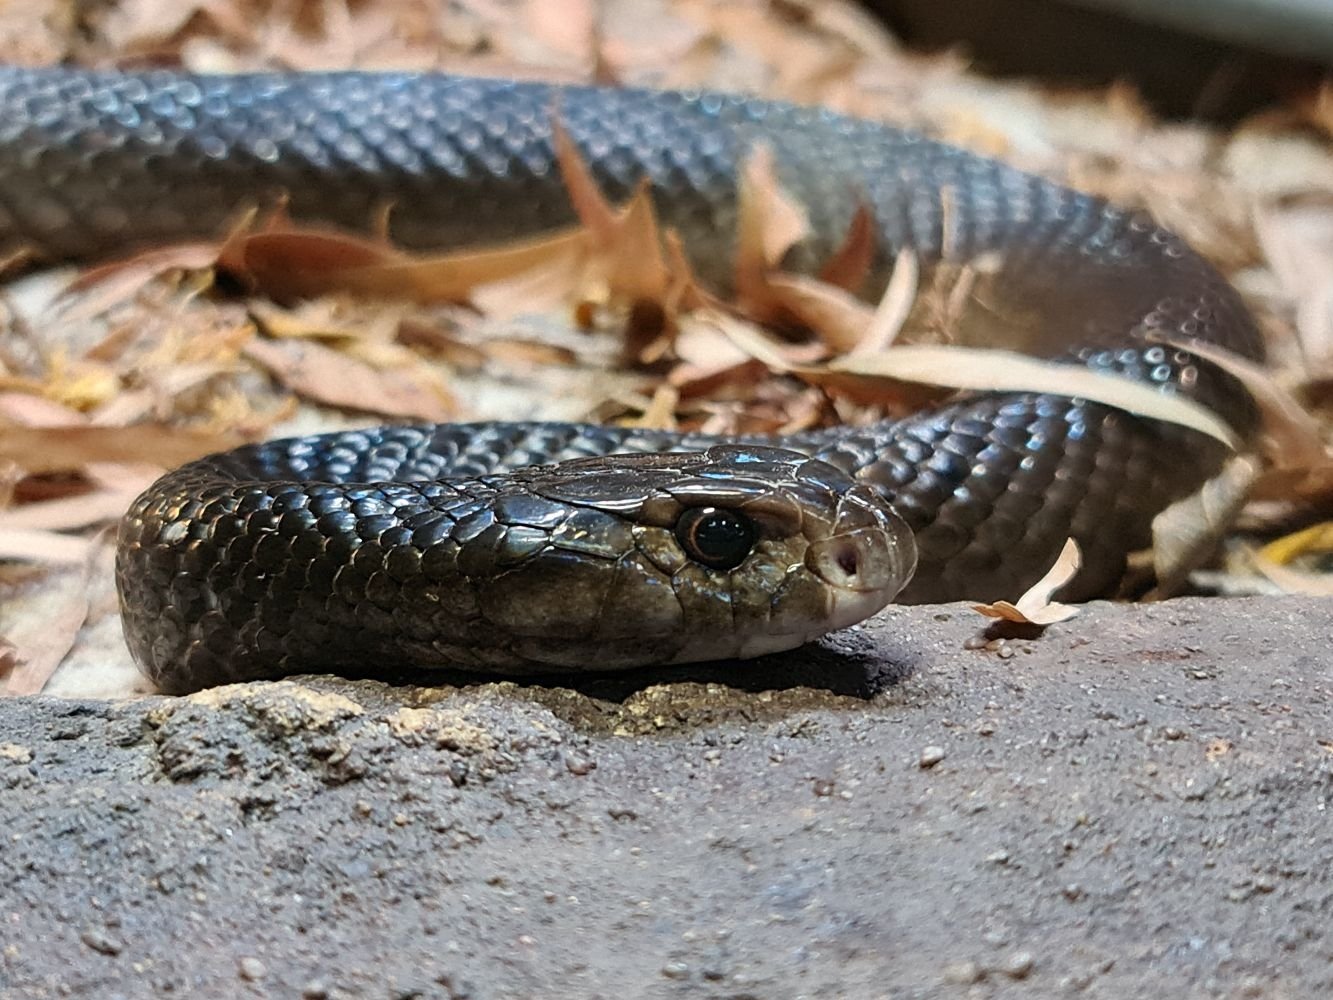 Slither in for some seriously interesting snake facts from the team at  Discover Deadly. — EAT DRINK DISCOVER